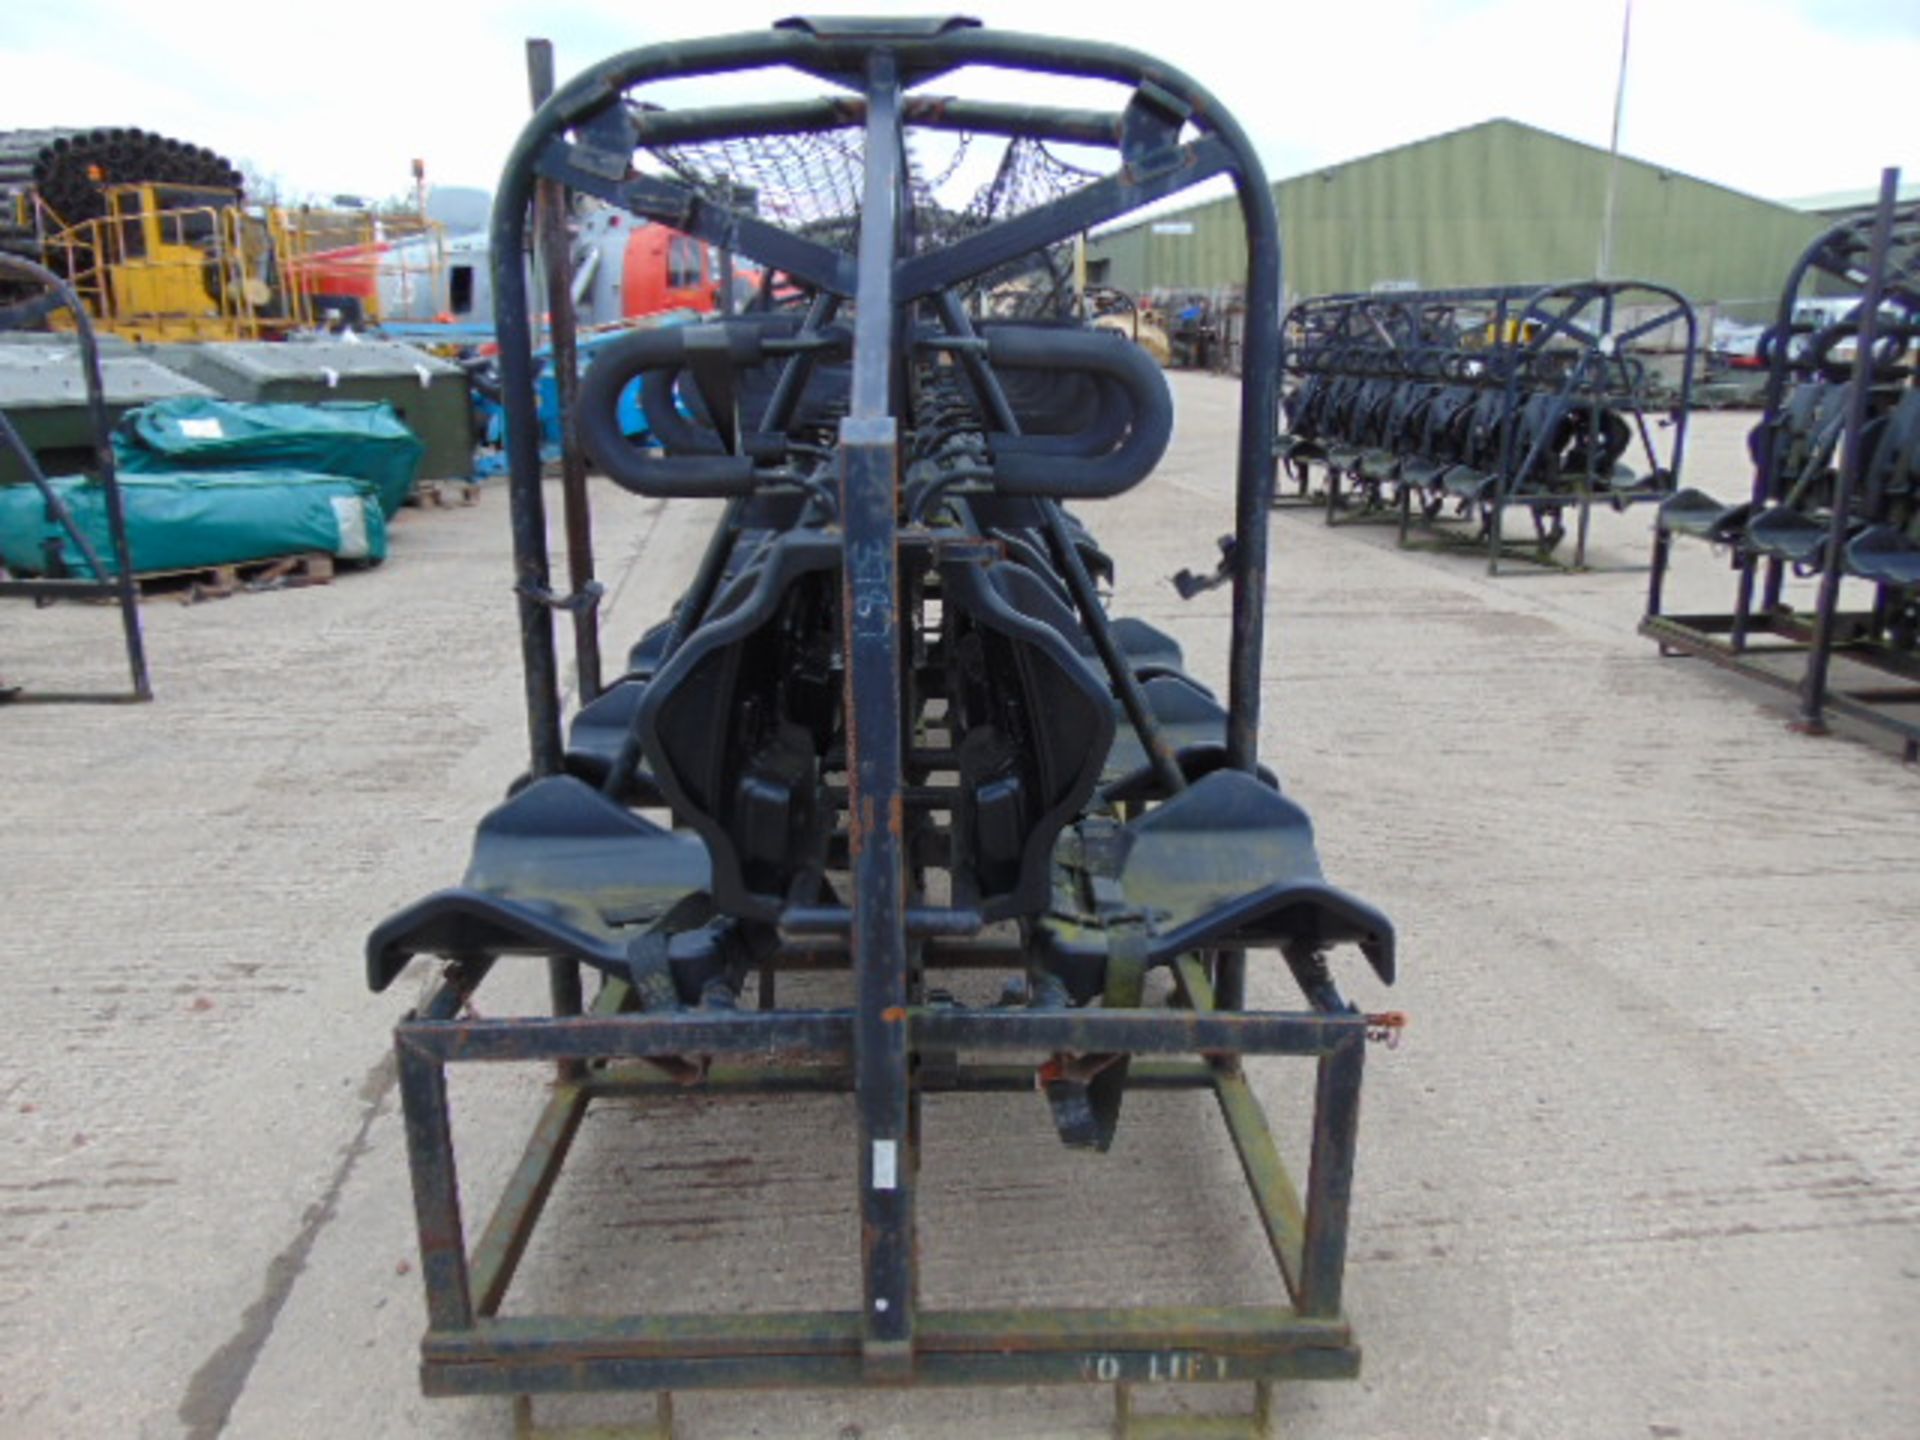 14 Man ROPS Security Seat suitable for Leyland Dafs, Bedfords etc - Image 6 of 6